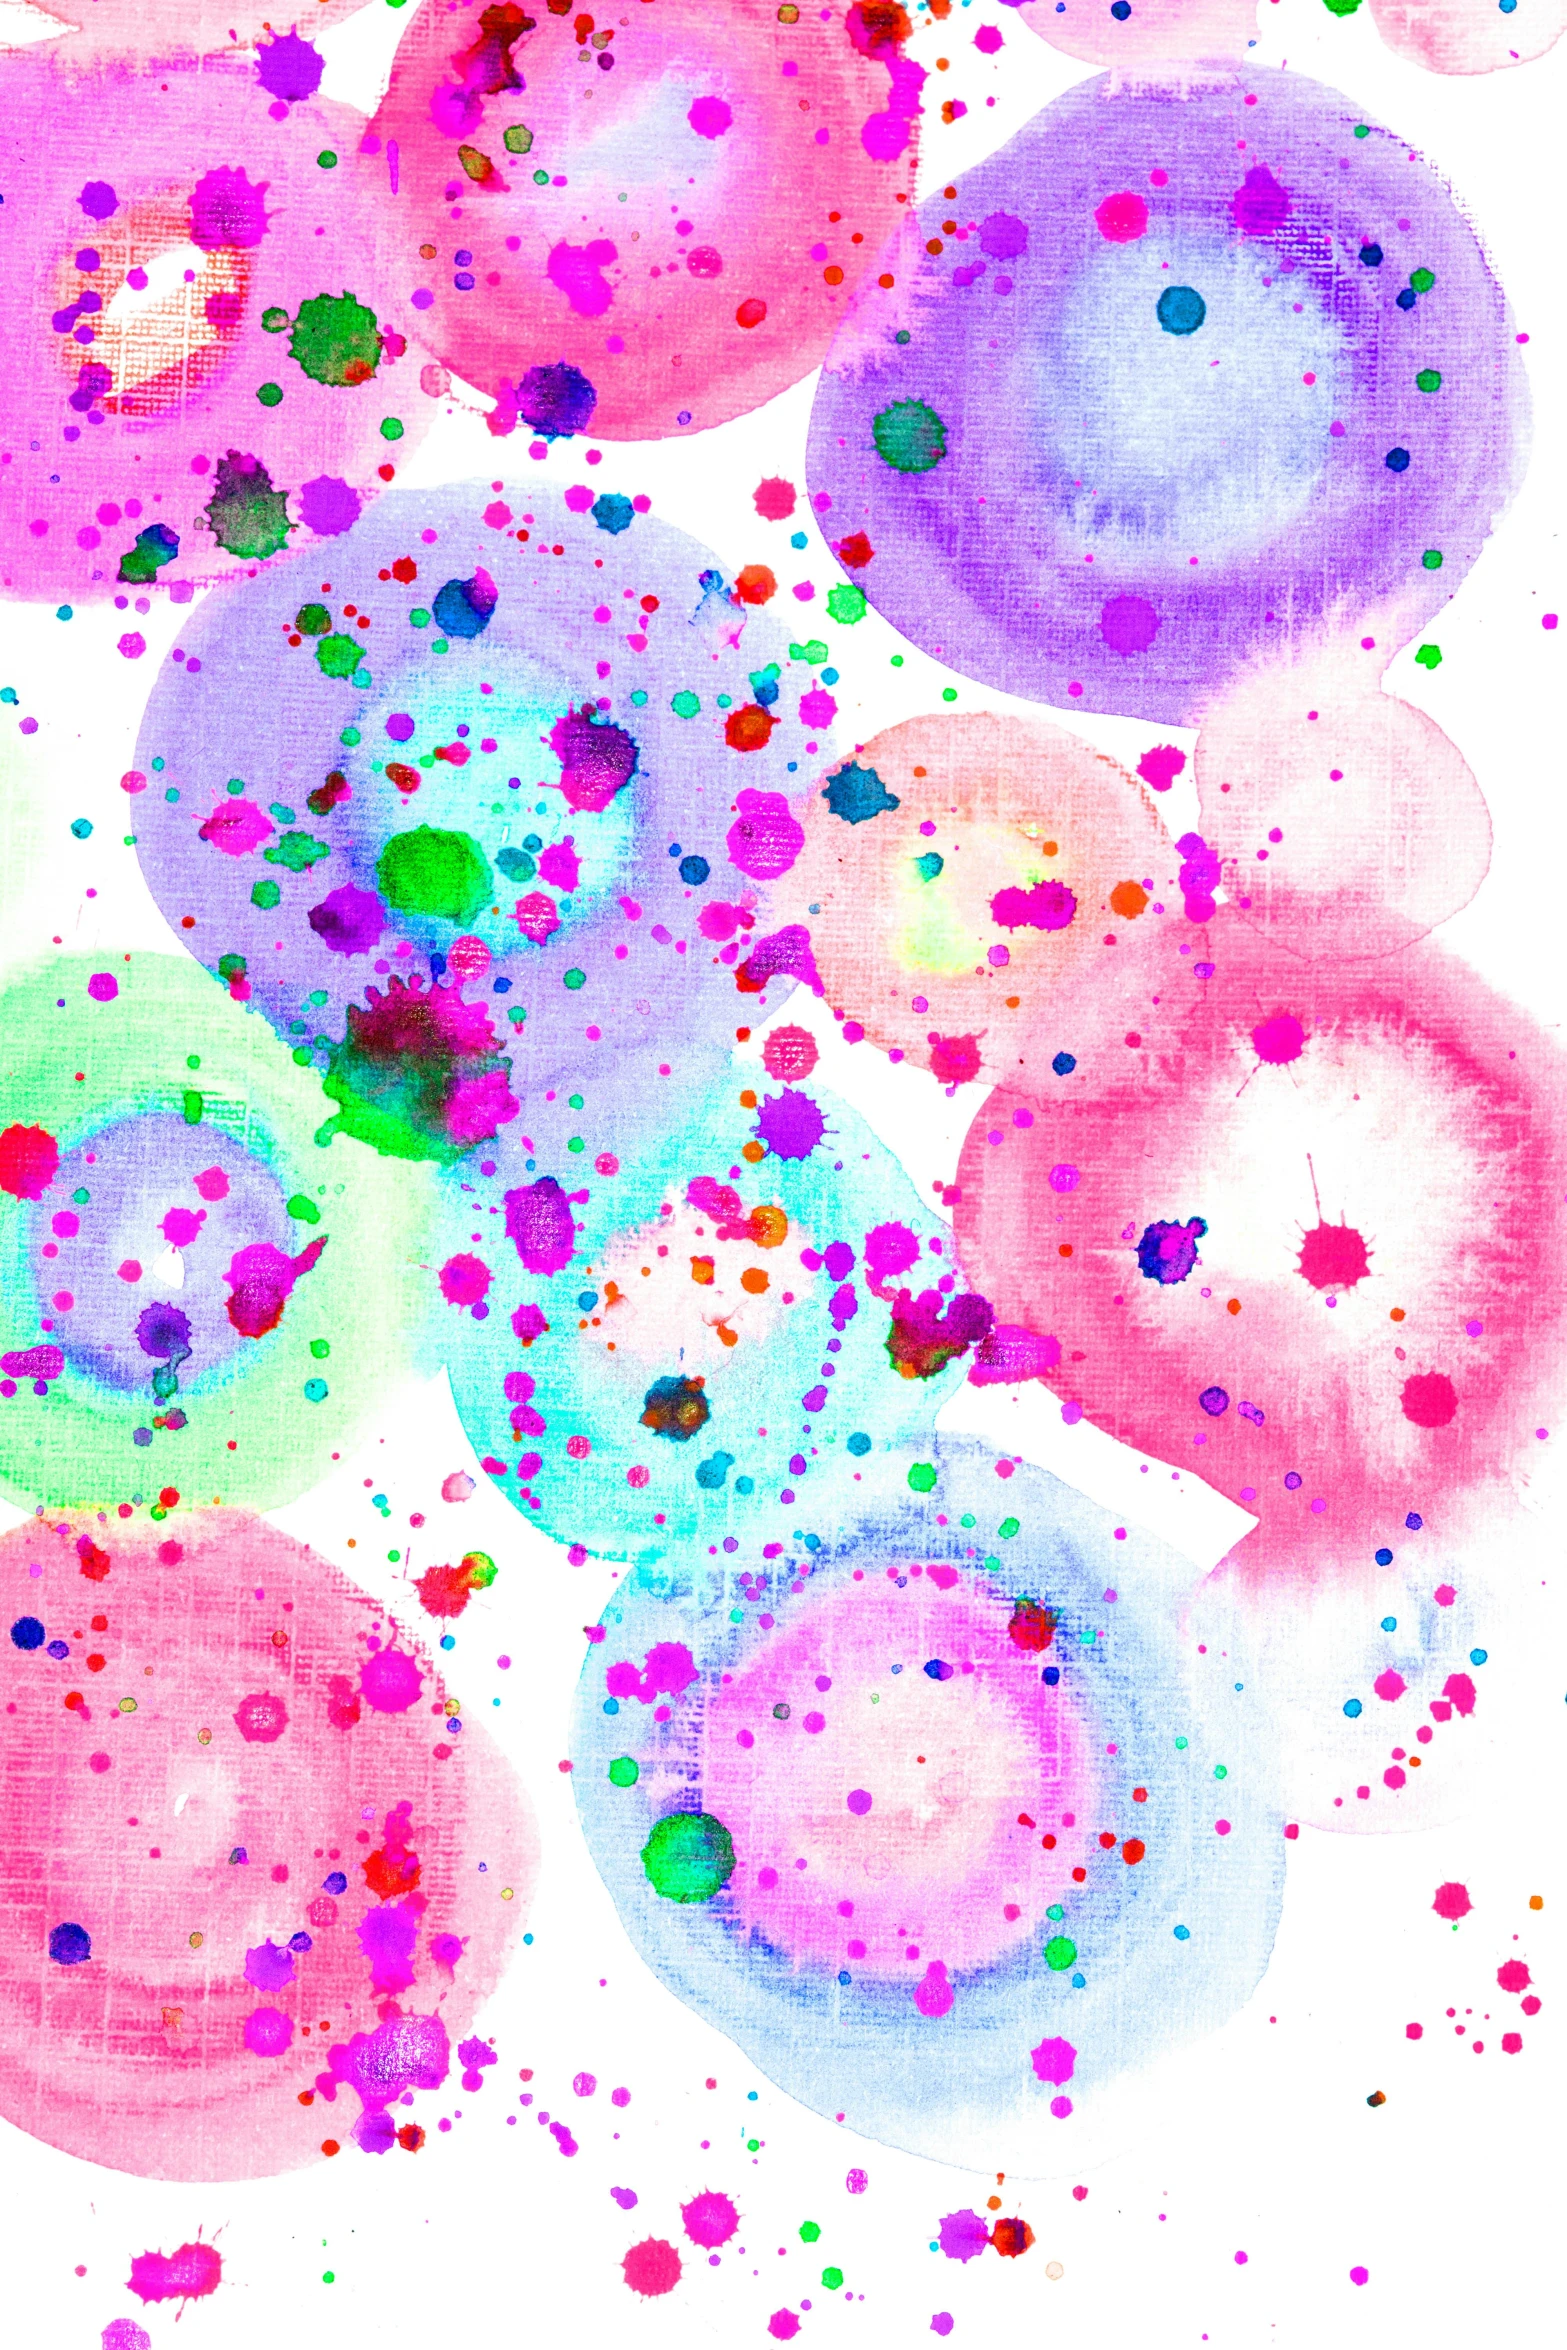 a painting of multicolored circles on a white background, inspired by Sam Francis, pexels, pointillism, 256x256, jellyfishes, abstract painting. 8k, colorful vapor